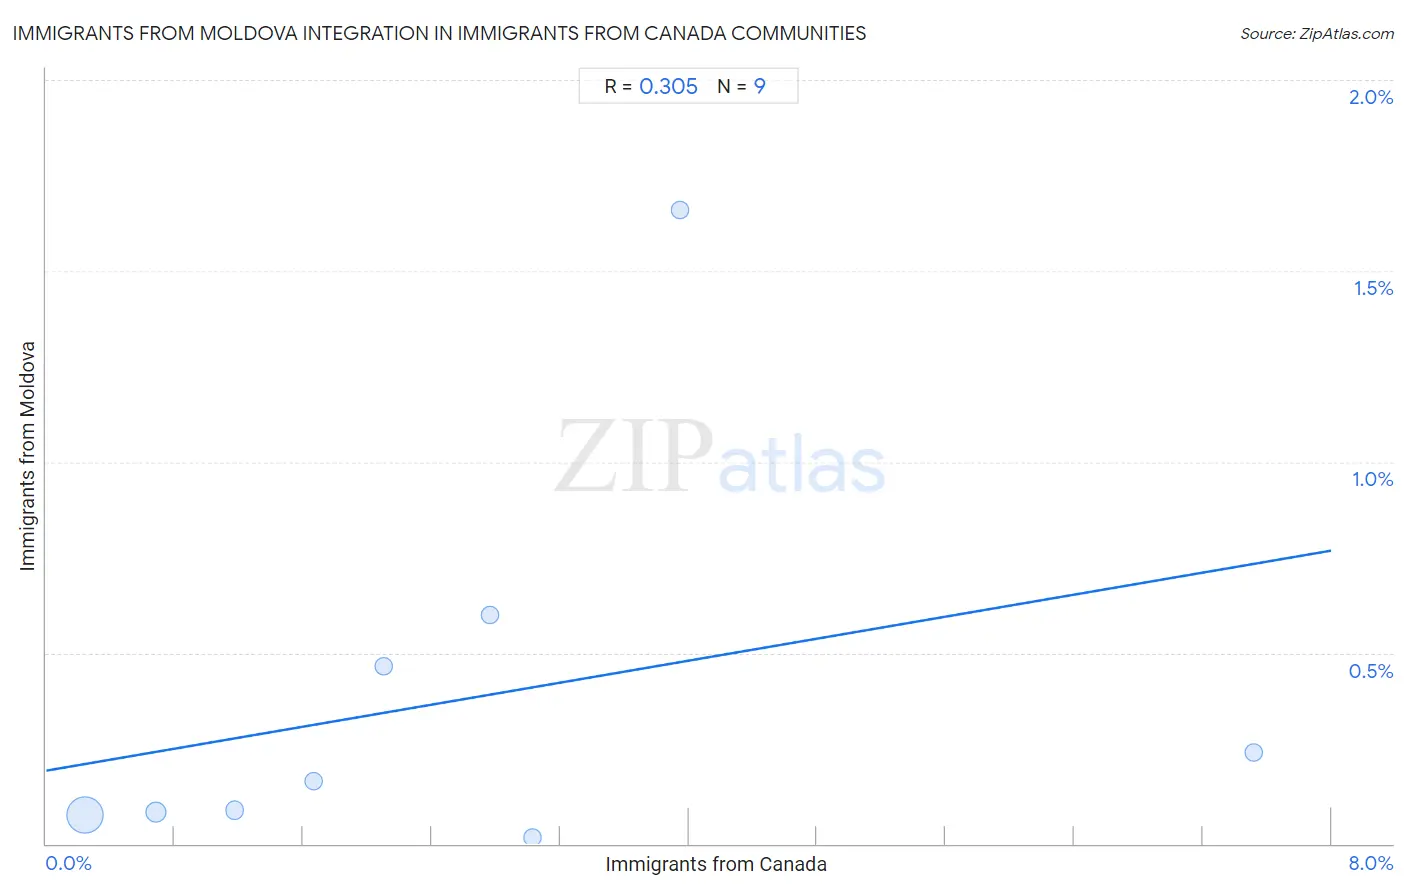 Immigrants from Canada Integration in Immigrants from Moldova Communities